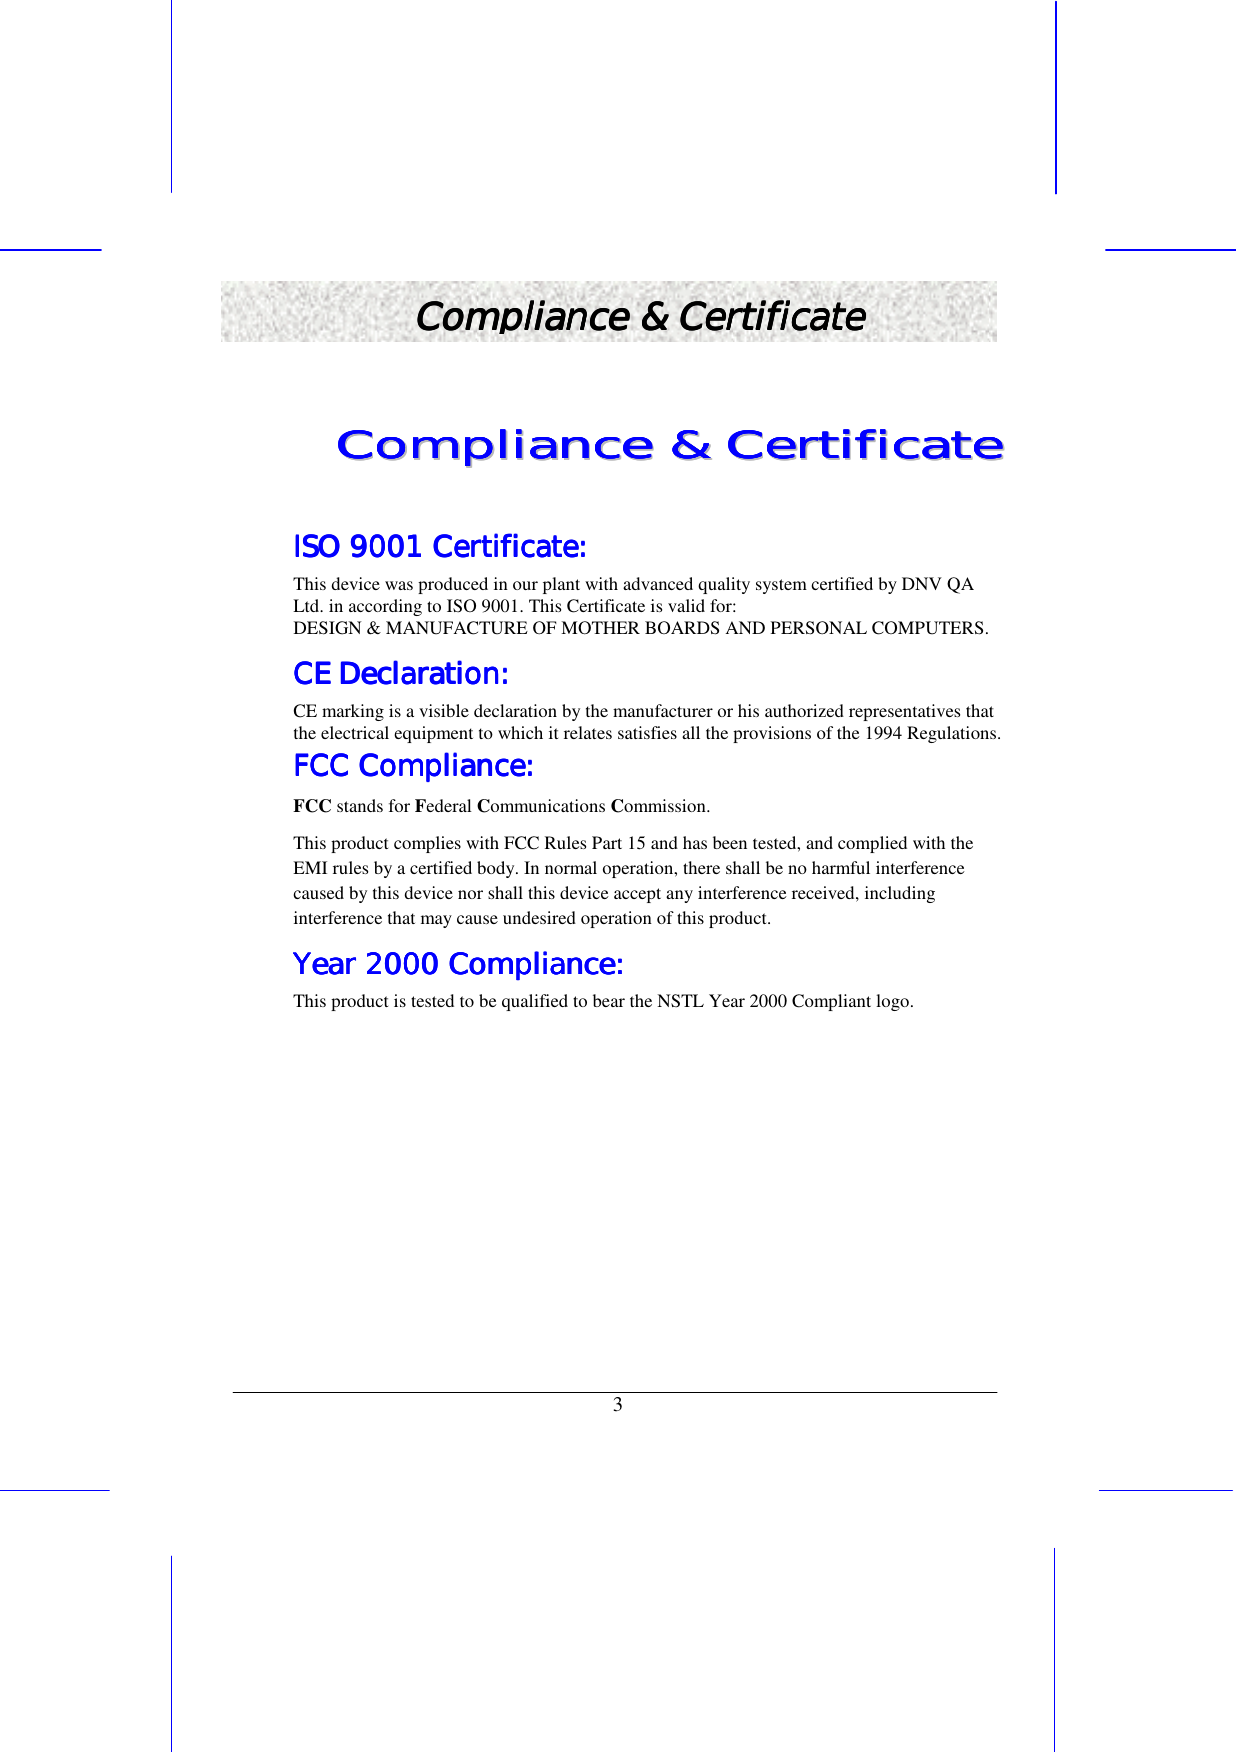   3 Compliance &amp; CertificateCompliance &amp; CertificateCompliance &amp; CertificateCompliance &amp; Certificate    CCCCCCCCoooooooommmmmmmmpppppppplllllllliiiiiiiiaaaaaaaannnnnnnncccccccceeeeeeee        &amp;&amp;&amp;&amp;&amp;&amp;&amp;&amp;        CCCCCCCCeeeeeeeerrrrrrrrttttttttiiiiiiiiffffffffiiiiiiiiccccccccaaaaaaaatttttttteeeeeeee        ISO 9001 Certificate:ISO 9001 Certificate:ISO 9001 Certificate:ISO 9001 Certificate:    This device was produced in our plant with advanced quality system certified by DNV QA Ltd. in according to ISO 9001. This Certificate is valid for: DESIGN &amp; MANUFACTURE OF MOTHER BOARDS AND PERSONAL COMPUTERS. CE Declaration:CE Declaration:CE Declaration:CE Declaration:    CE marking is a visible declaration by the manufacturer or his authorized representatives that the electrical equipment to which it relates satisfies all the provisions of the 1994 Regulations. FCCFCCFCCFCC Compliance: Compliance: Compliance: Compliance:    FCC stands for Federal Communications Commission.    This product complies with FCC Rules Part 15 and has been tested, and complied with the EMI rules by a certified body. In normal operation, there shall be no harmful interference caused by this device nor shall this device accept any interference received, including interference that may cause undesired operation of this product.  Year 2000 Compliance:Year 2000 Compliance:Year 2000 Compliance:Year 2000 Compliance:    This product is tested to be qualified to bear the NSTL Year 2000 Compliant logo.   